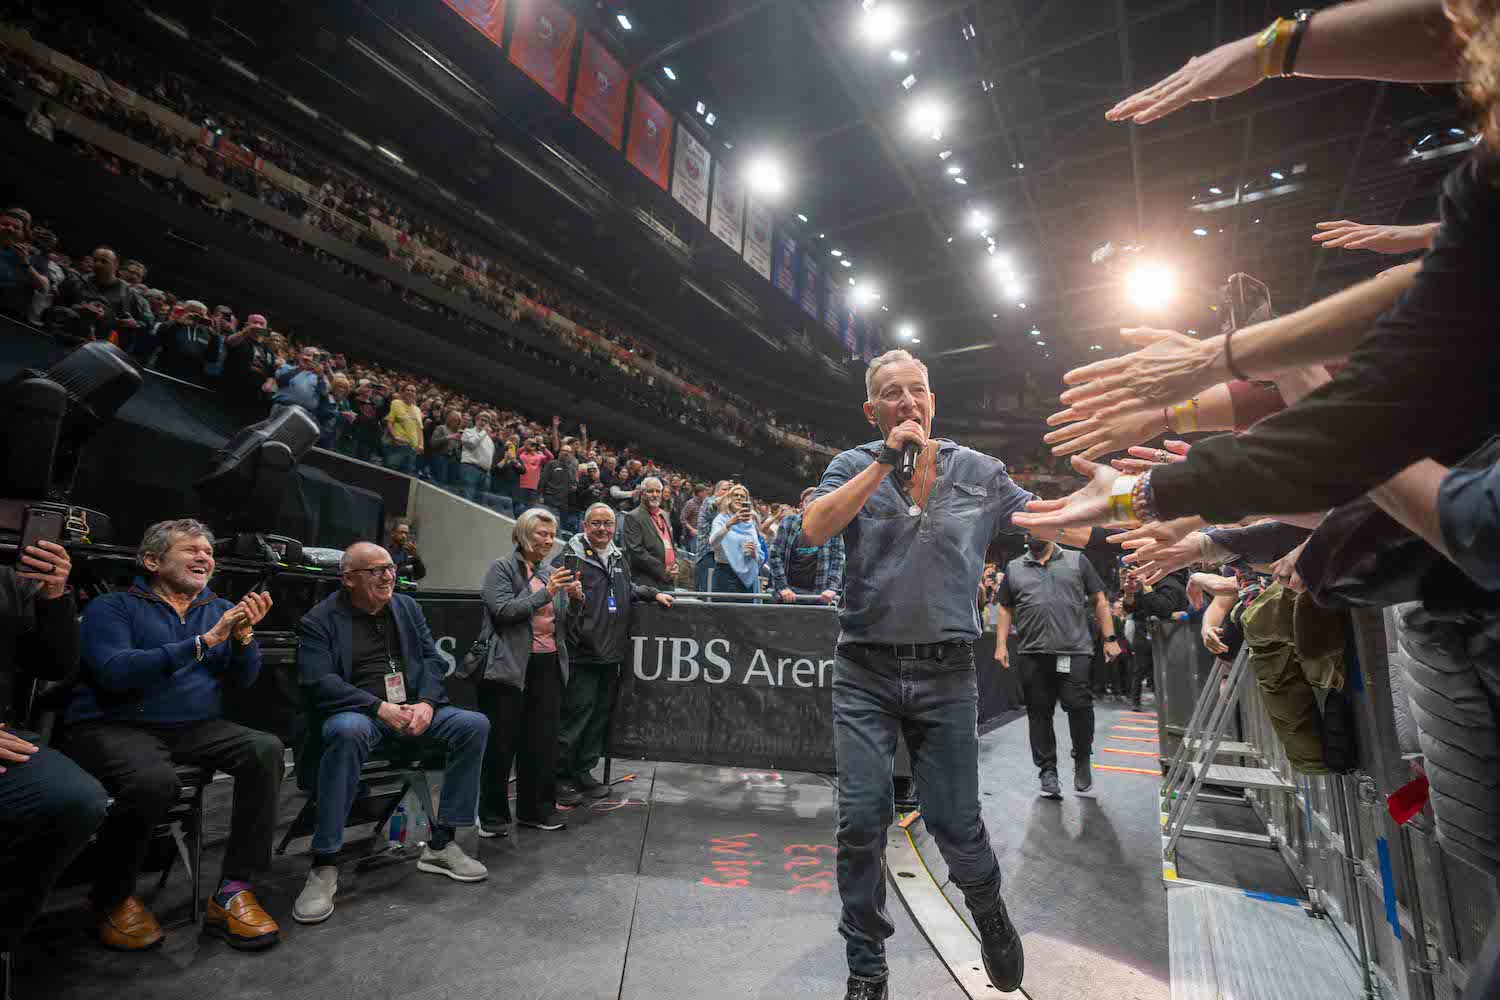 Bruce Springsteen & E Street Band at UBS Arena, Belmont Park, NY on April 9, 2023.